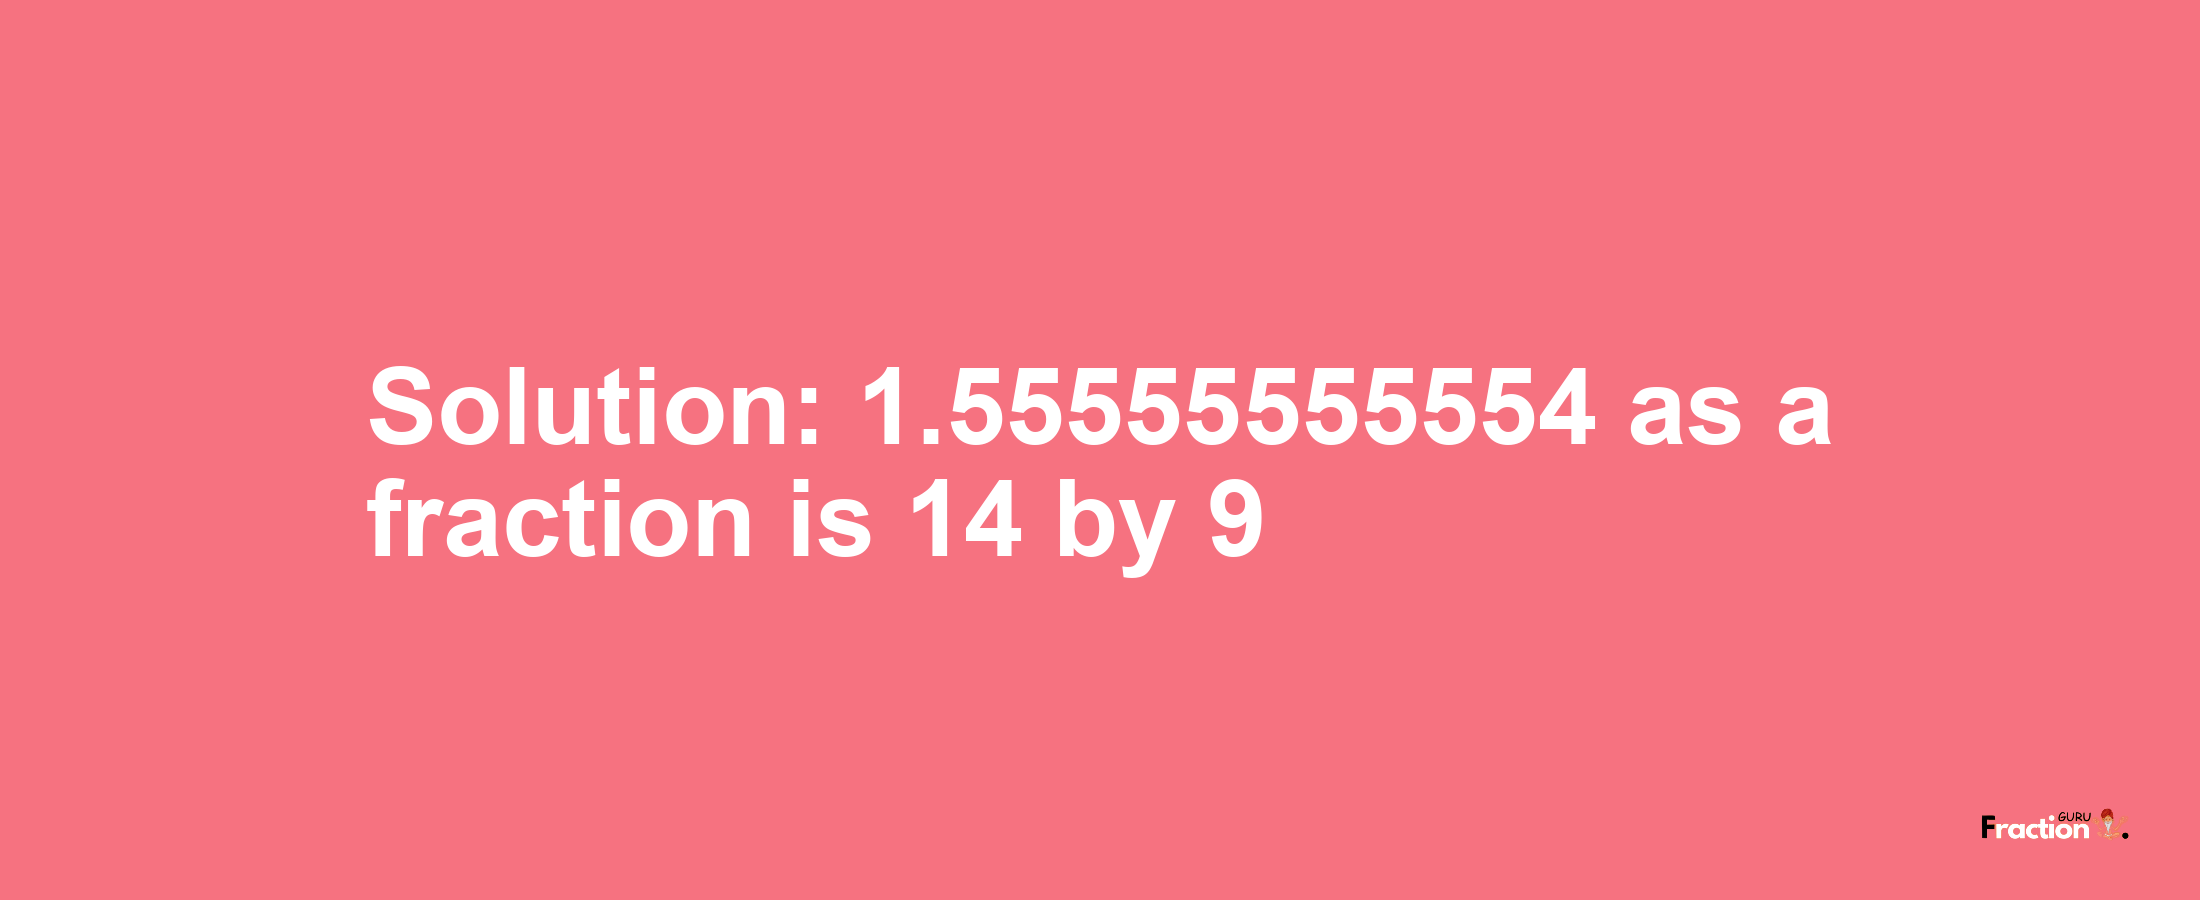 Solution:1.55555555554 as a fraction is 14/9